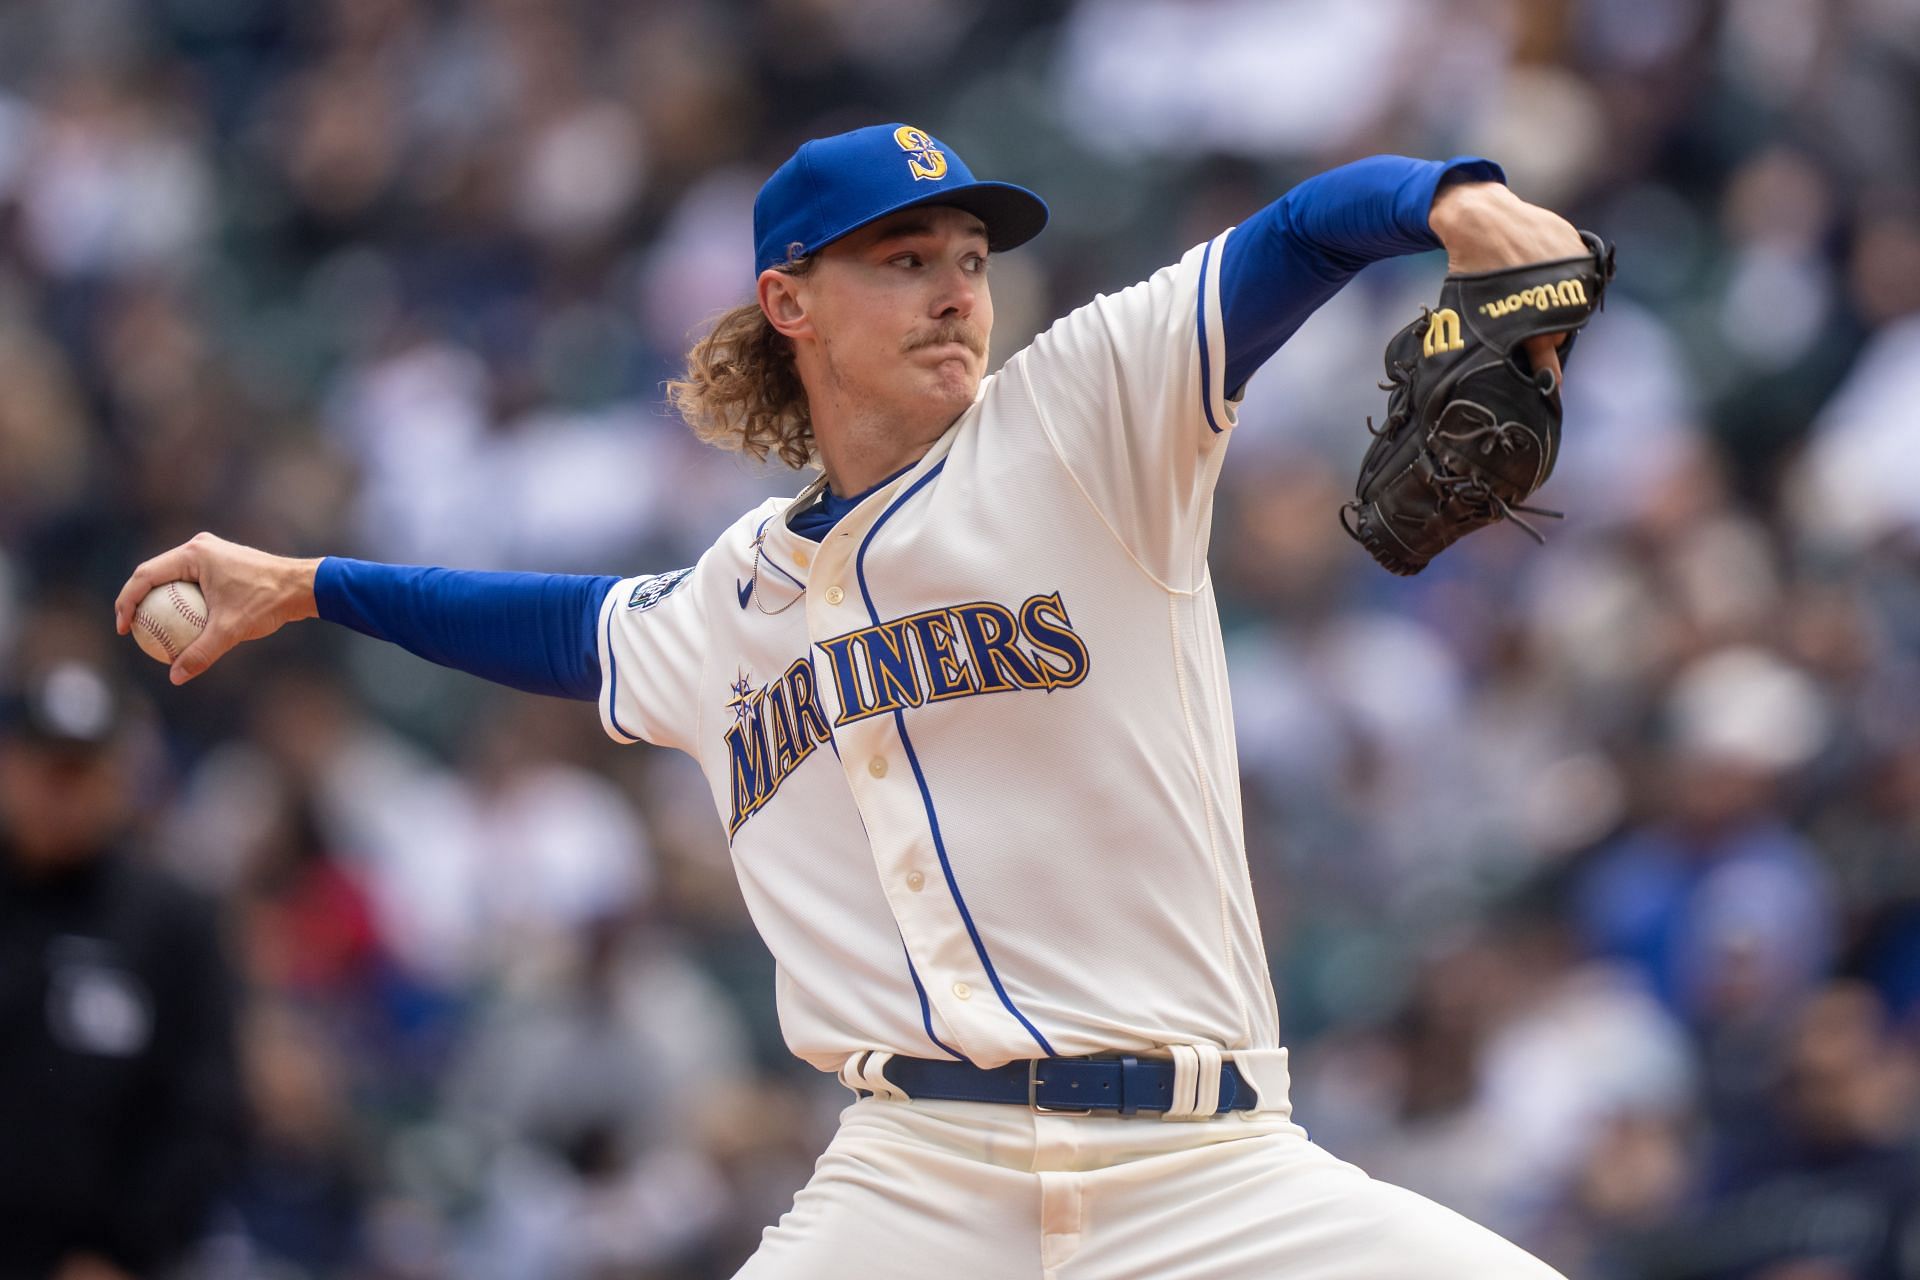 Seattle Mariners fans gushing as rookie pitcher Bryce Miller dominant